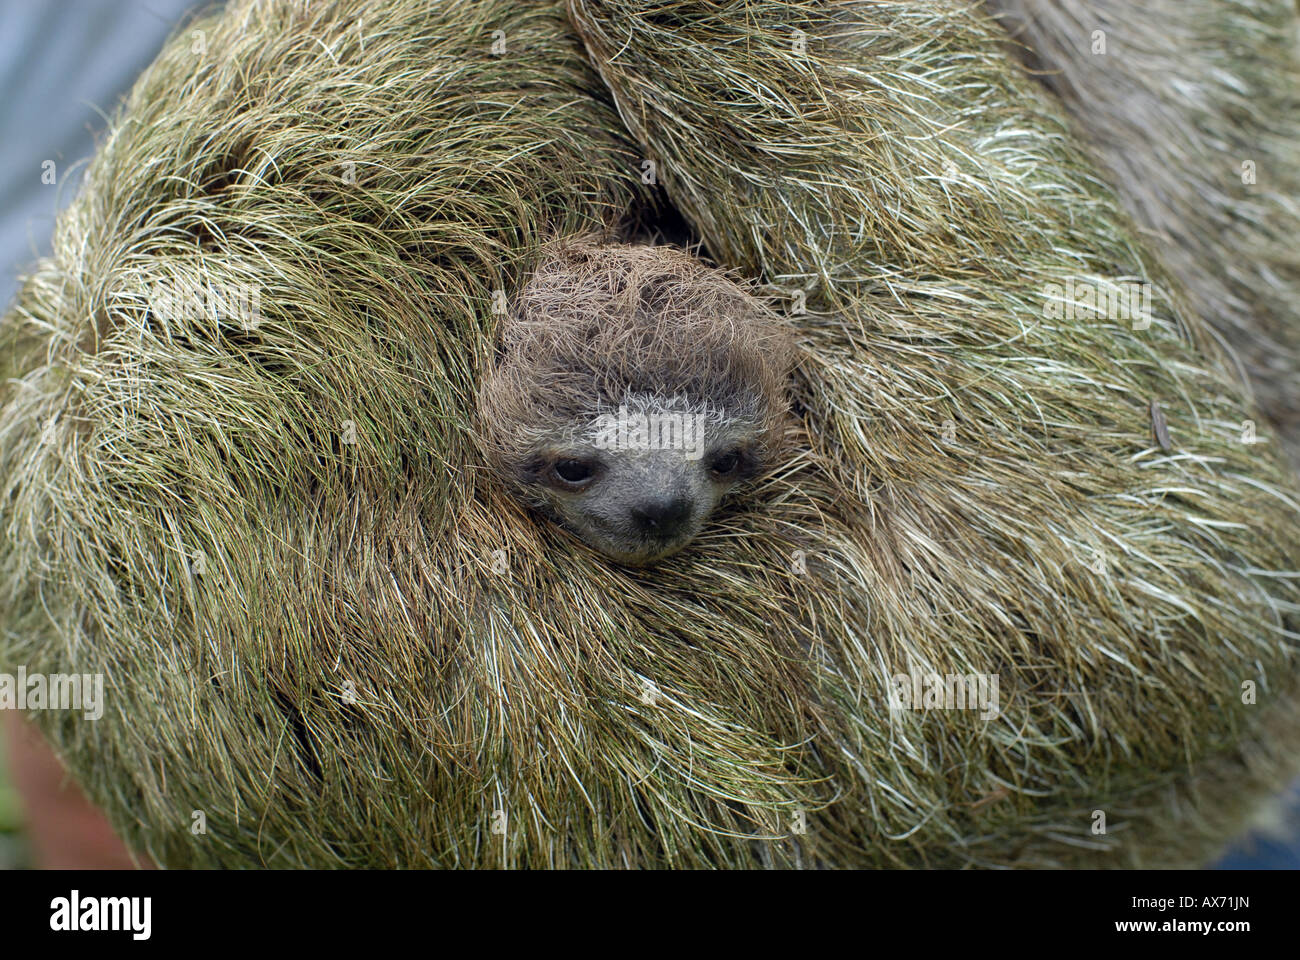 Mother and baby sloth in the jungles of Panama. Three toed sloth Stock Photo